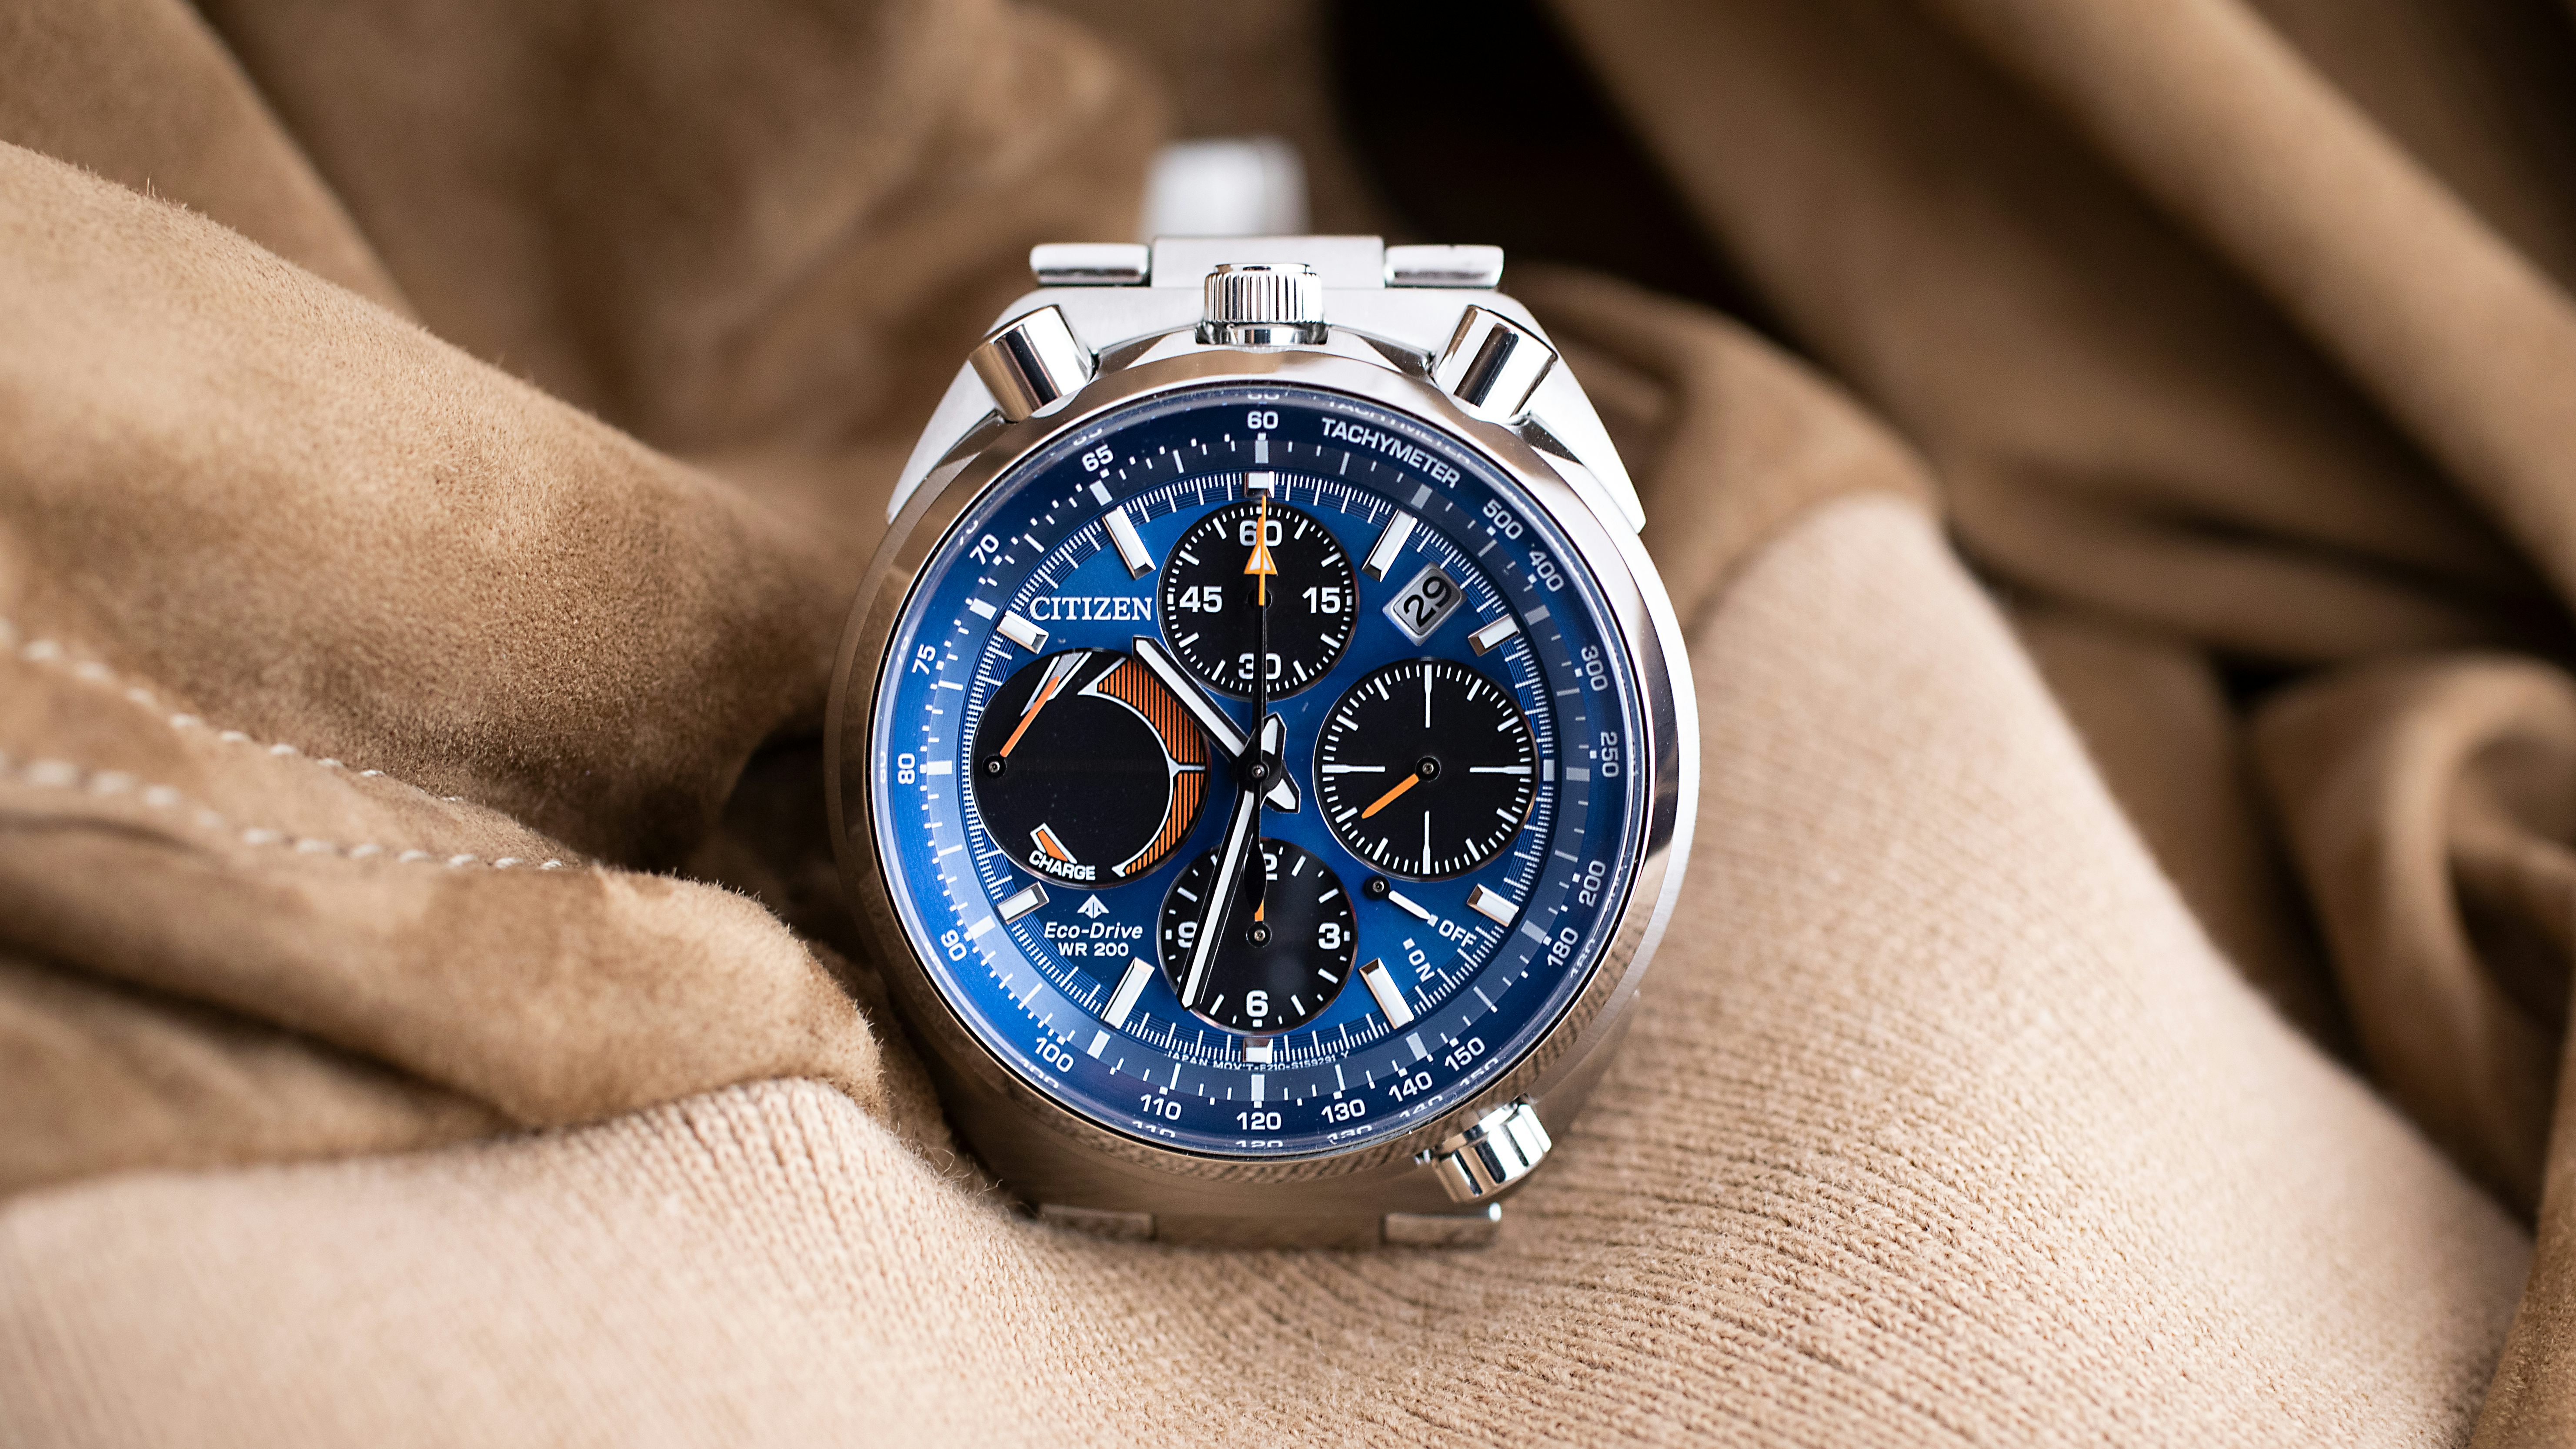 Citizen Eco-Drive: What You Need To Know? - The Watch Company